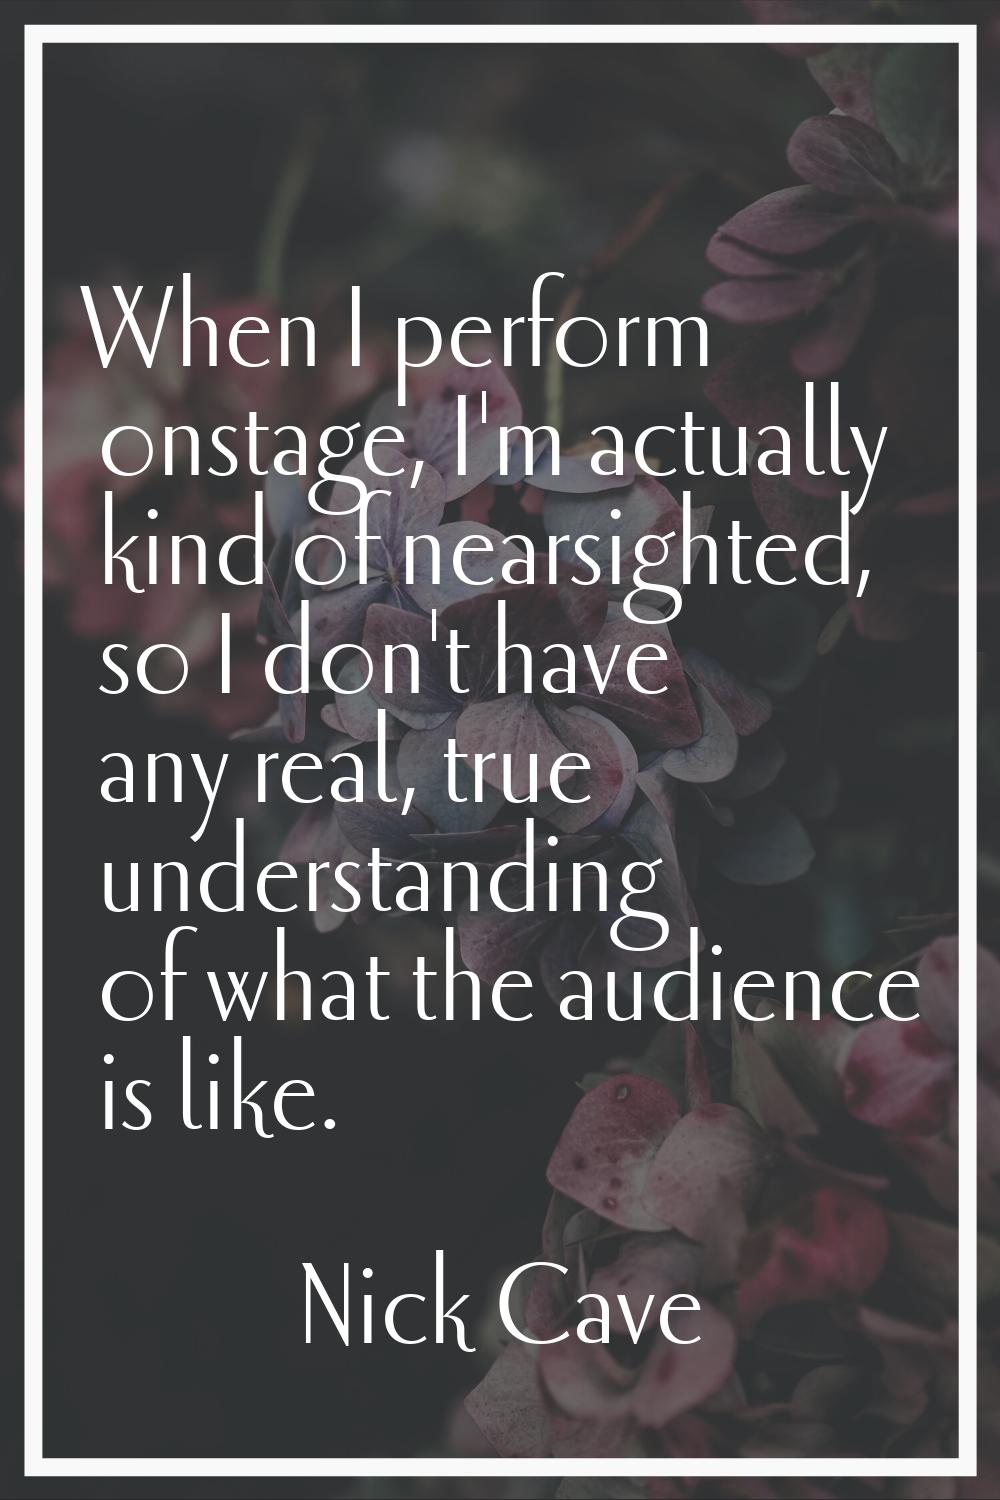 When I perform onstage, I'm actually kind of nearsighted, so I don't have any real, true understand